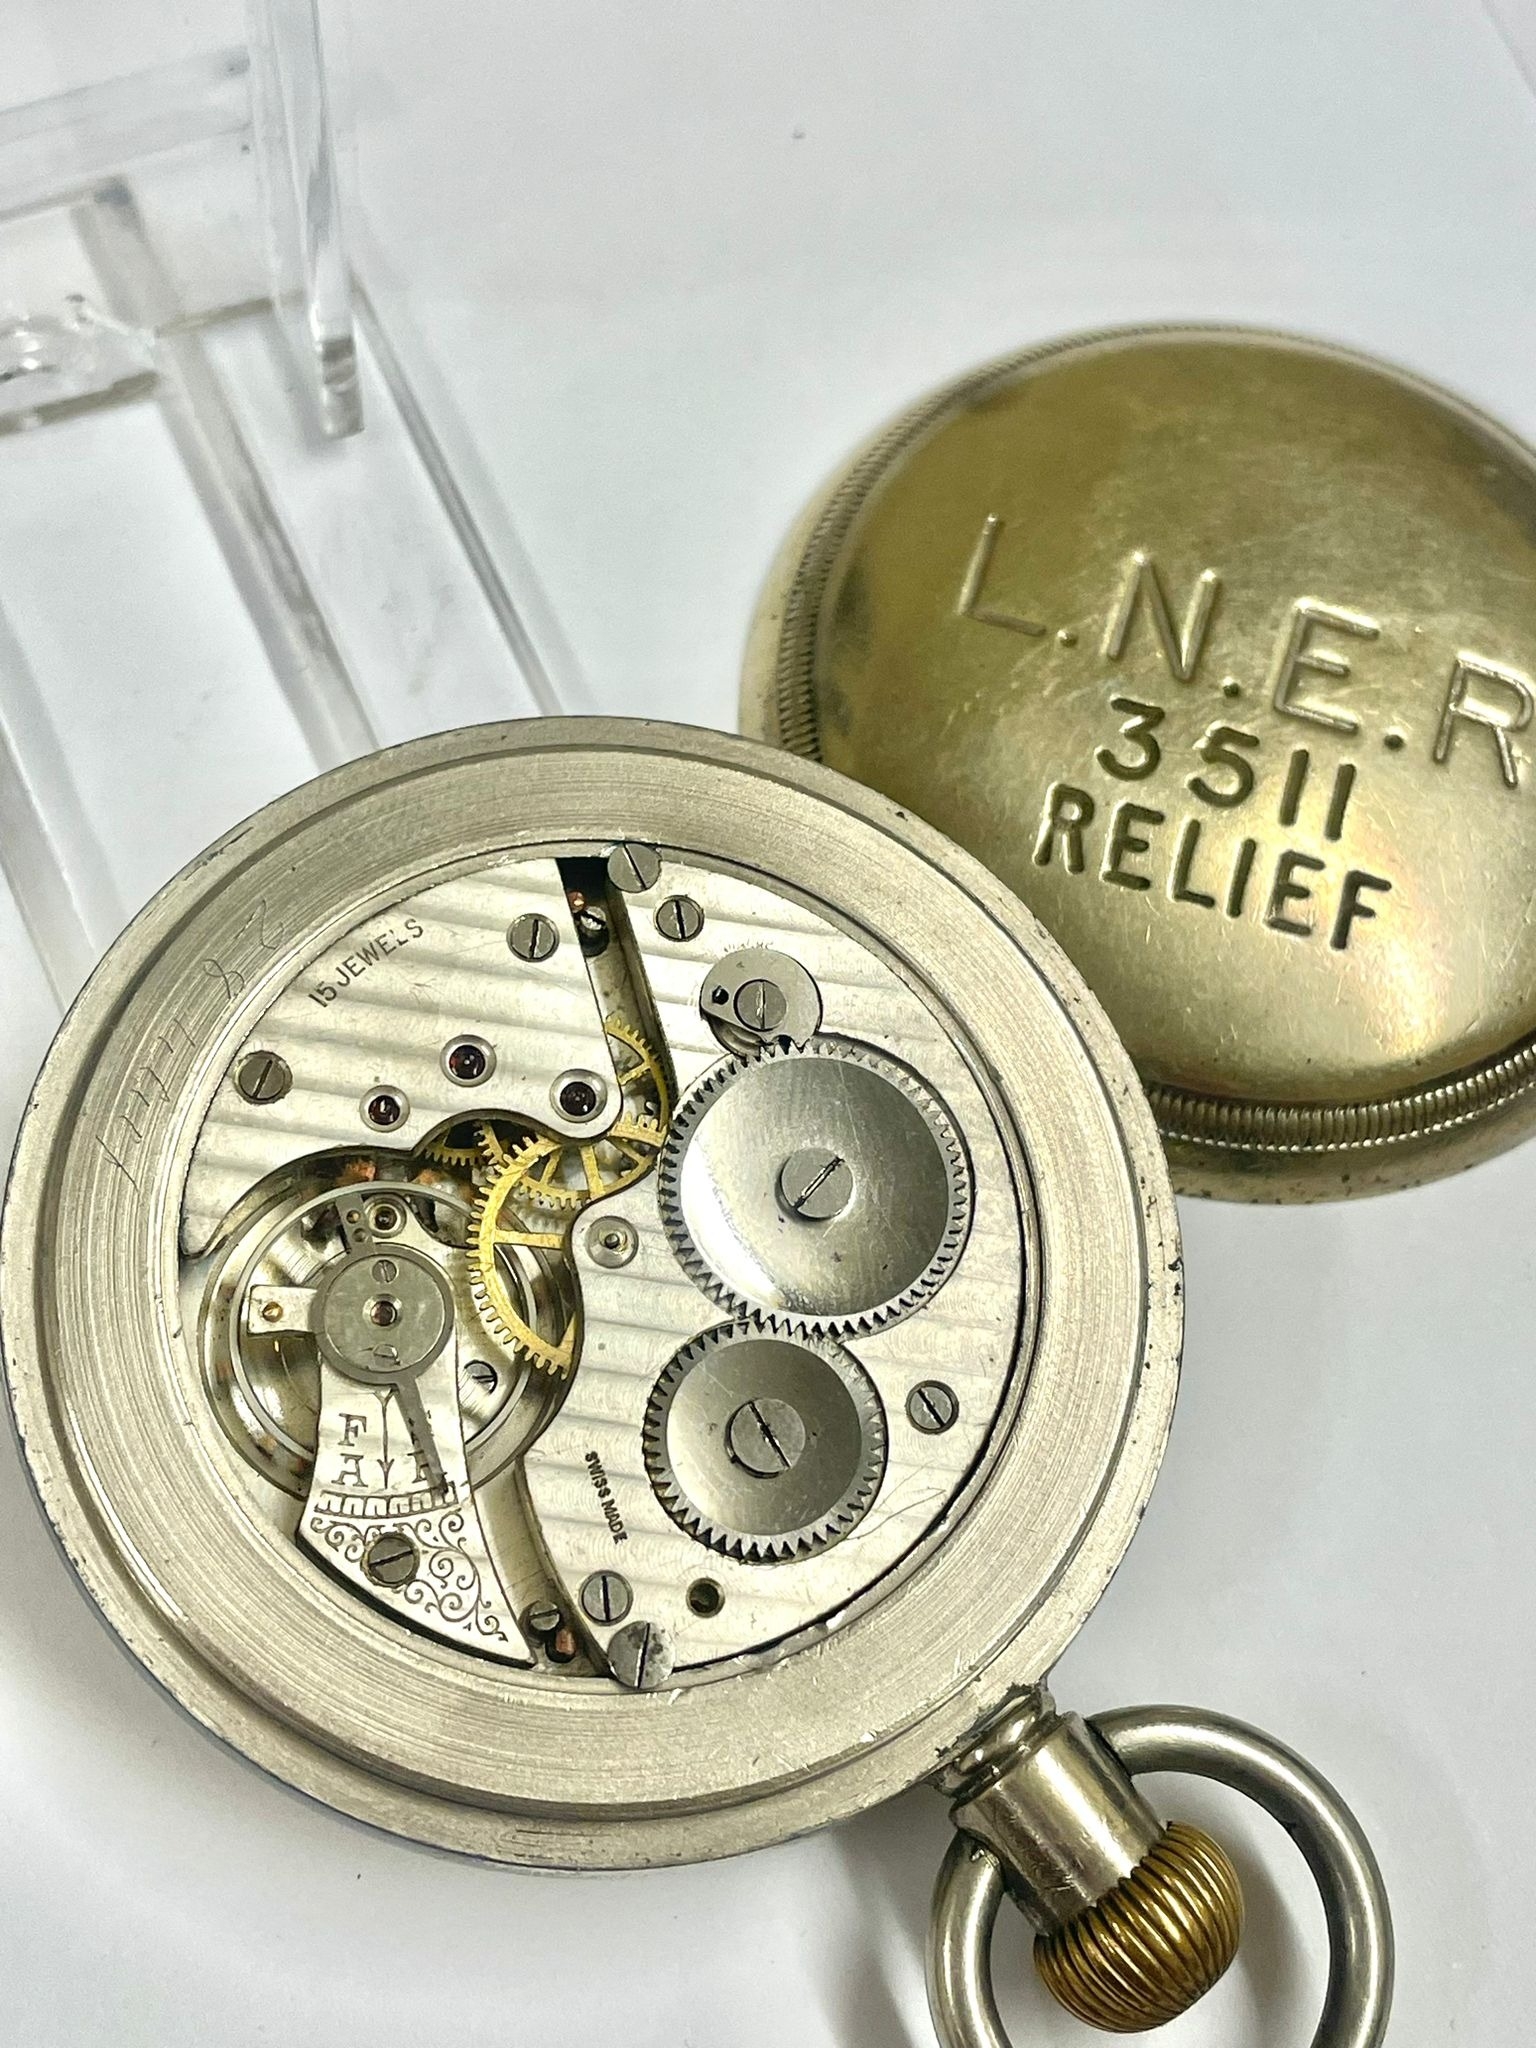 Vintage Railway pocket watch ticks , sold as found. - Image 3 of 3